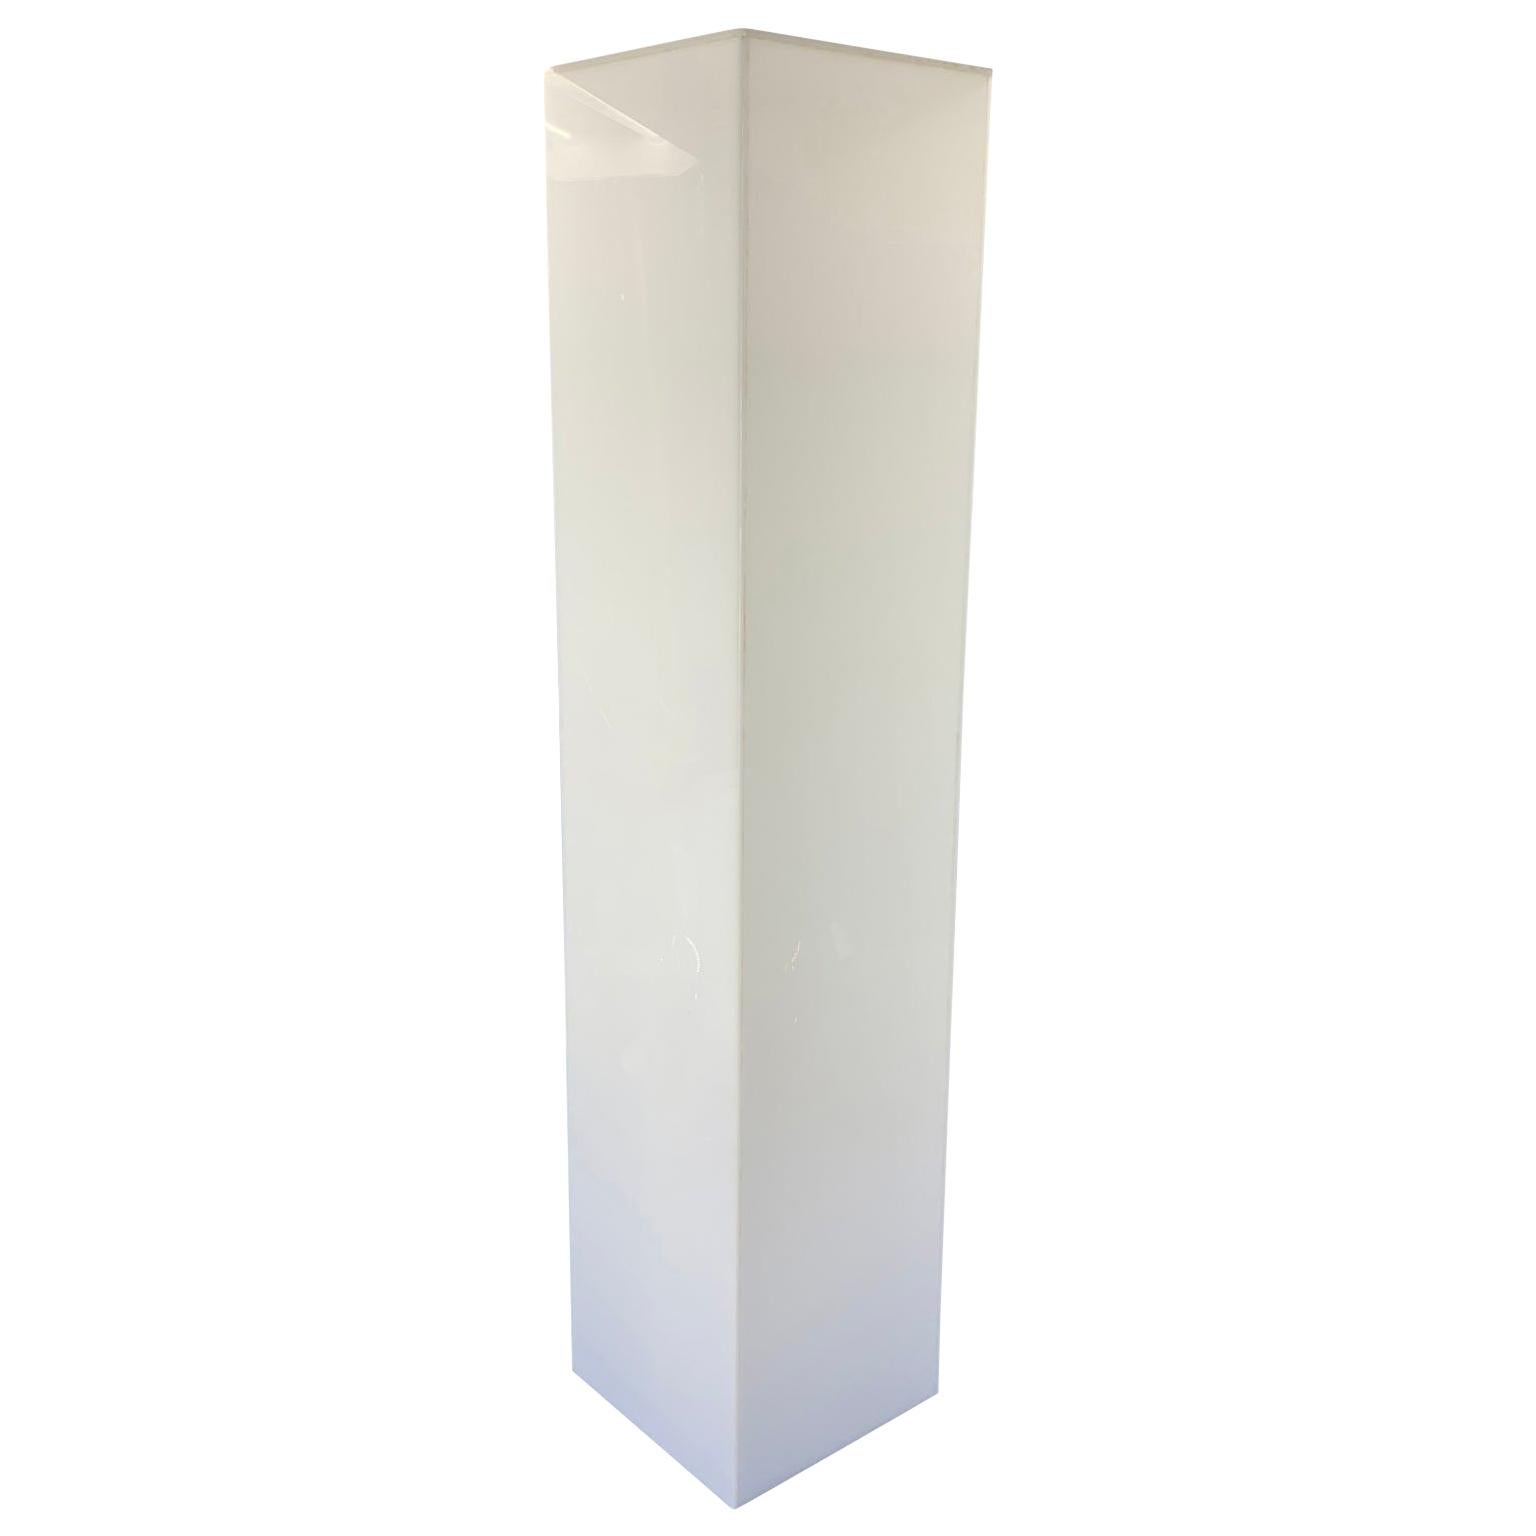 3X3X0.75" Acrylic Display Stand Pedestal New Solid Block Lucite 